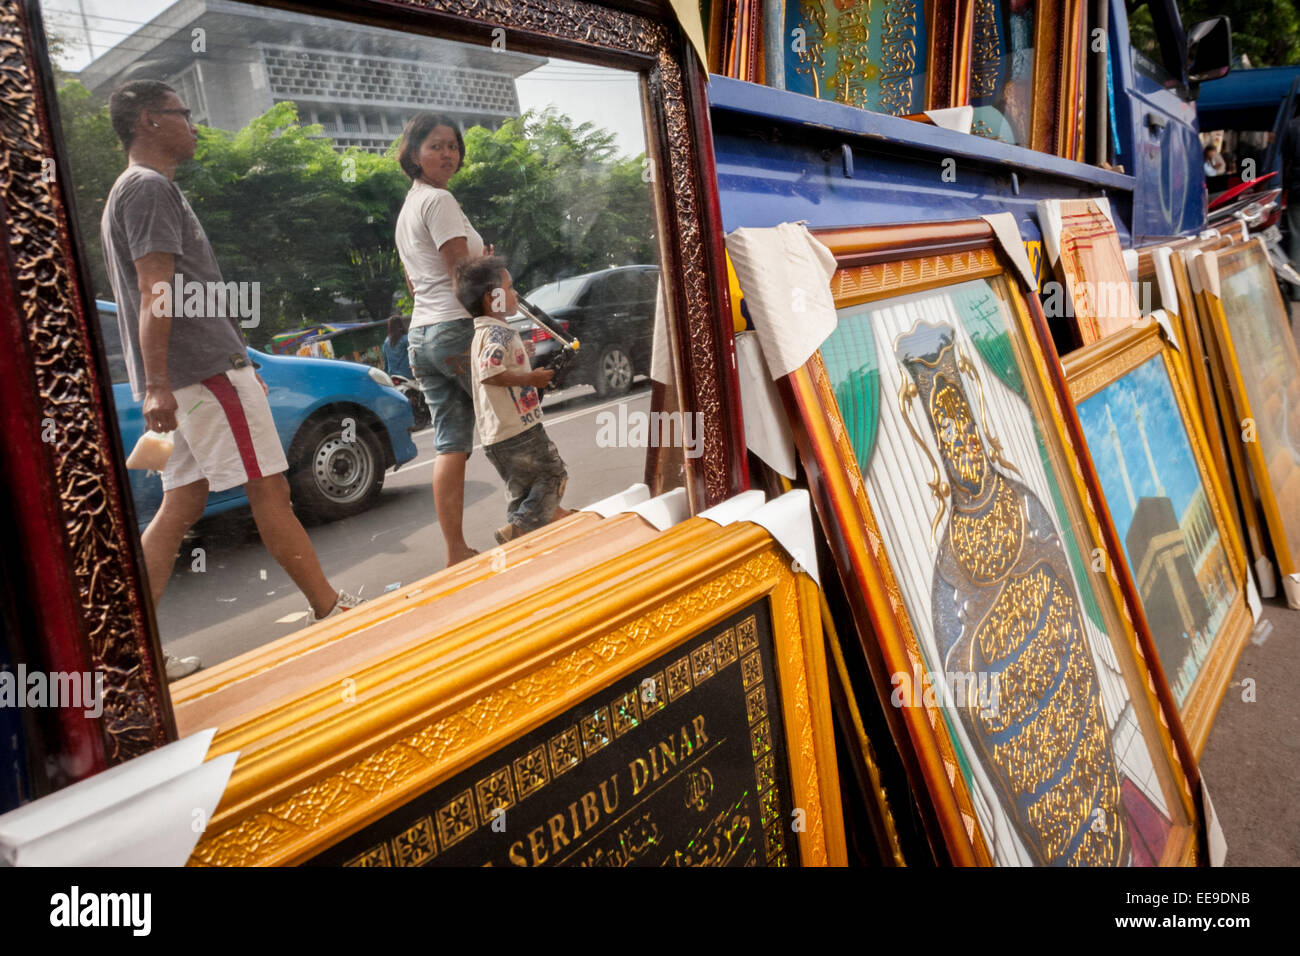 People passing through a mirror and house decoration vendor in Surabaya, East Java, Indonesia. Stock Photo